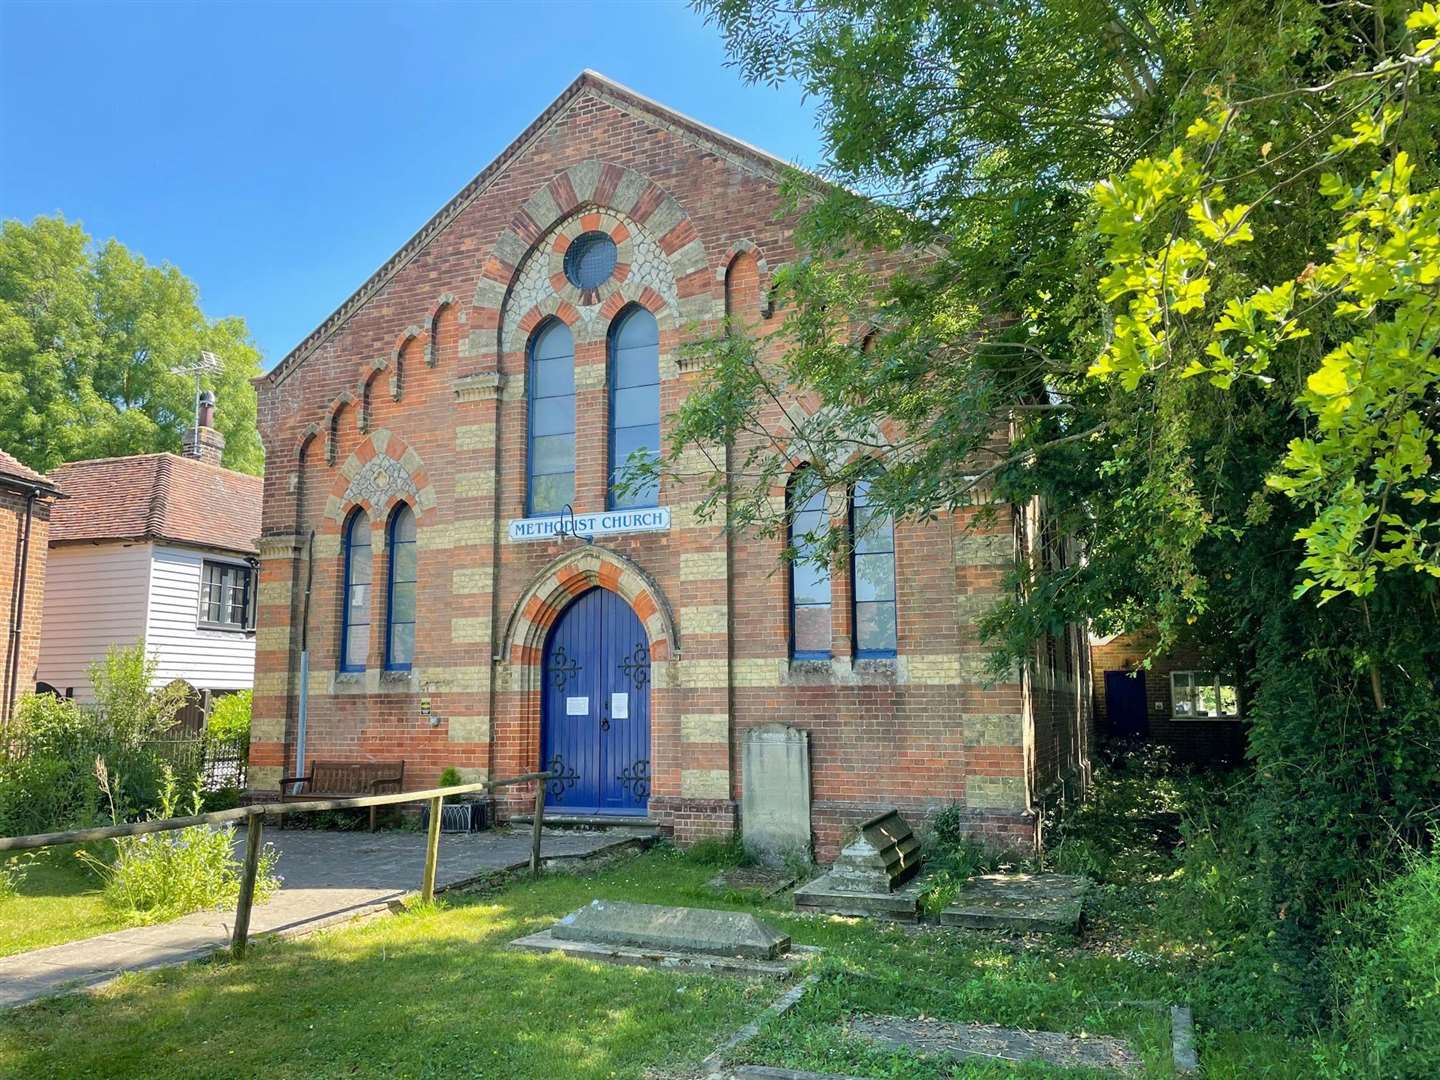 Three former Methodist churches in villages near Ashford, including this one in Headcorn, are for sale at auction. Picture: Clive Emson (54020415)